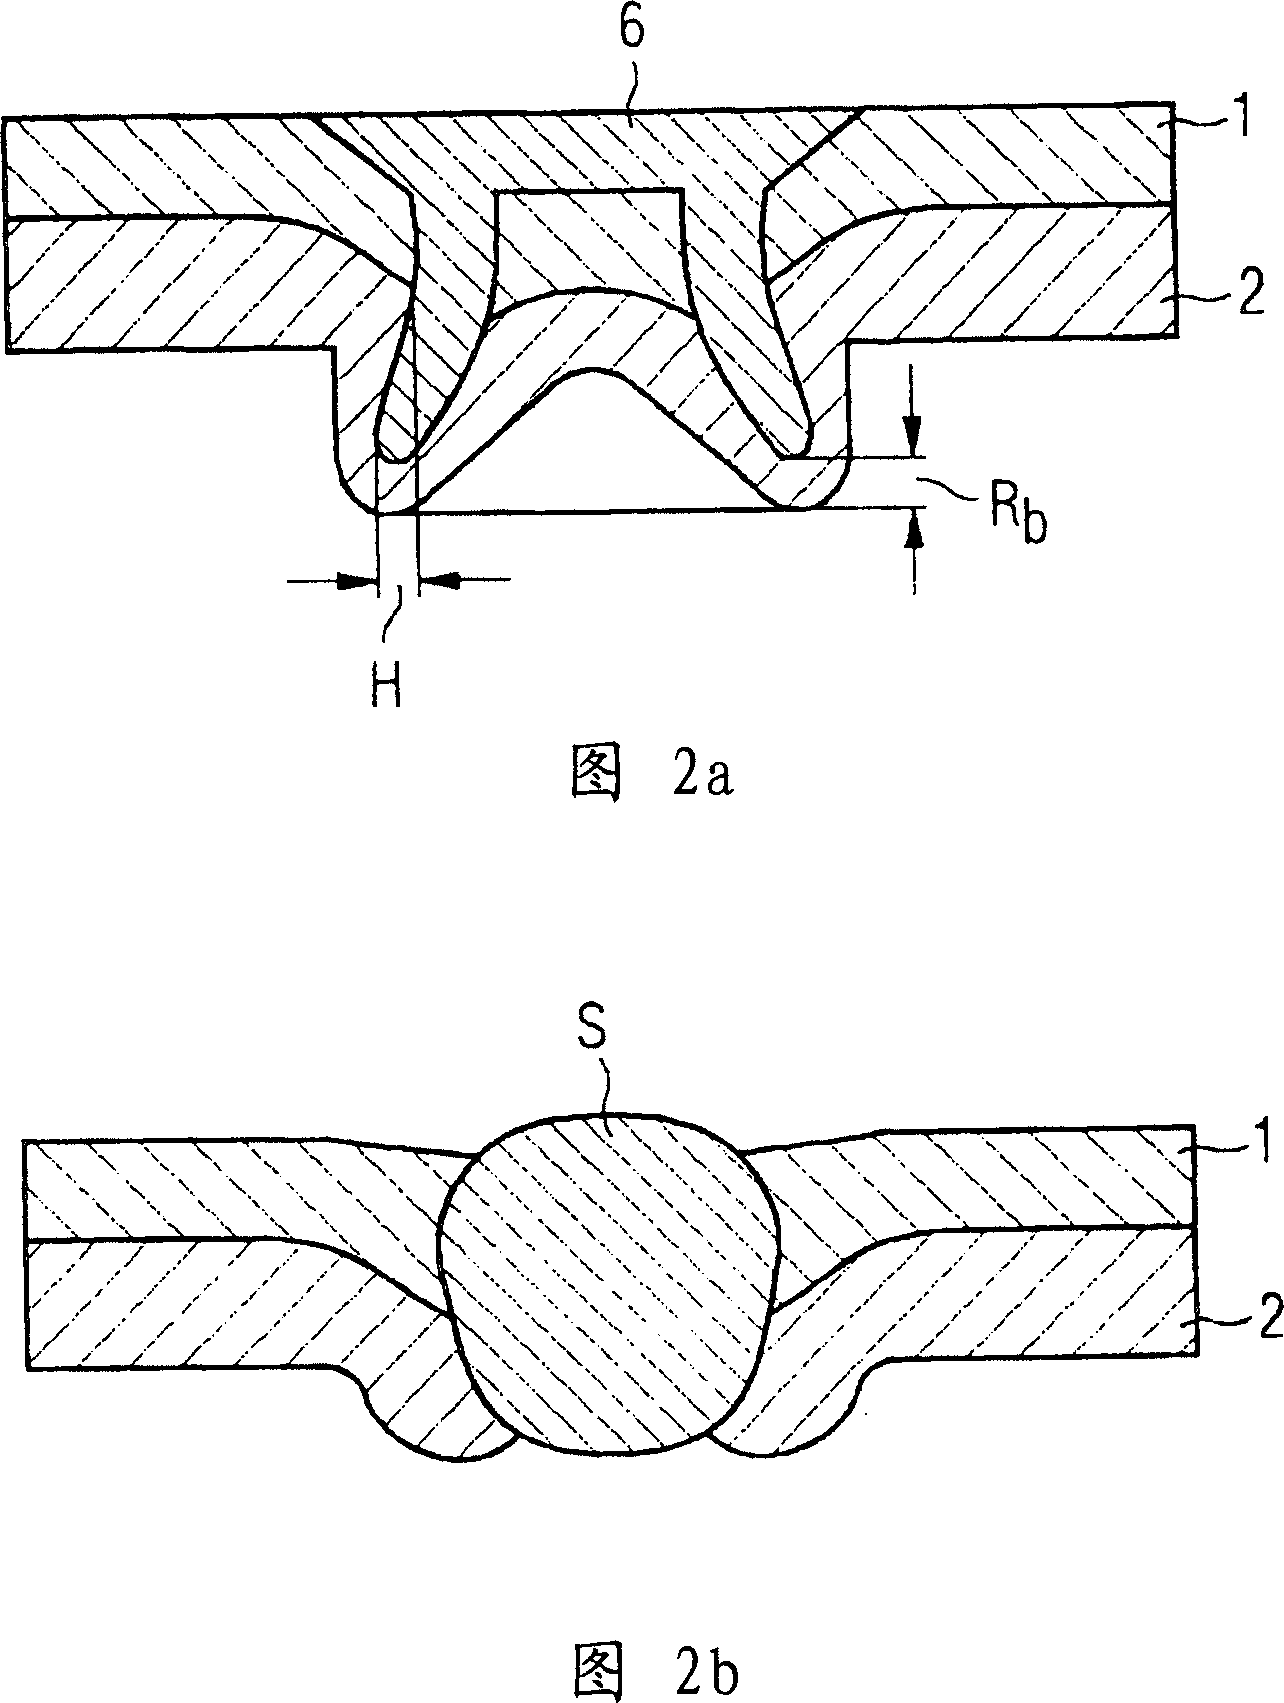 Method for joining two or several profiled parts or metal sheets which are mechanically joined and pressure-welded at one or several connection points